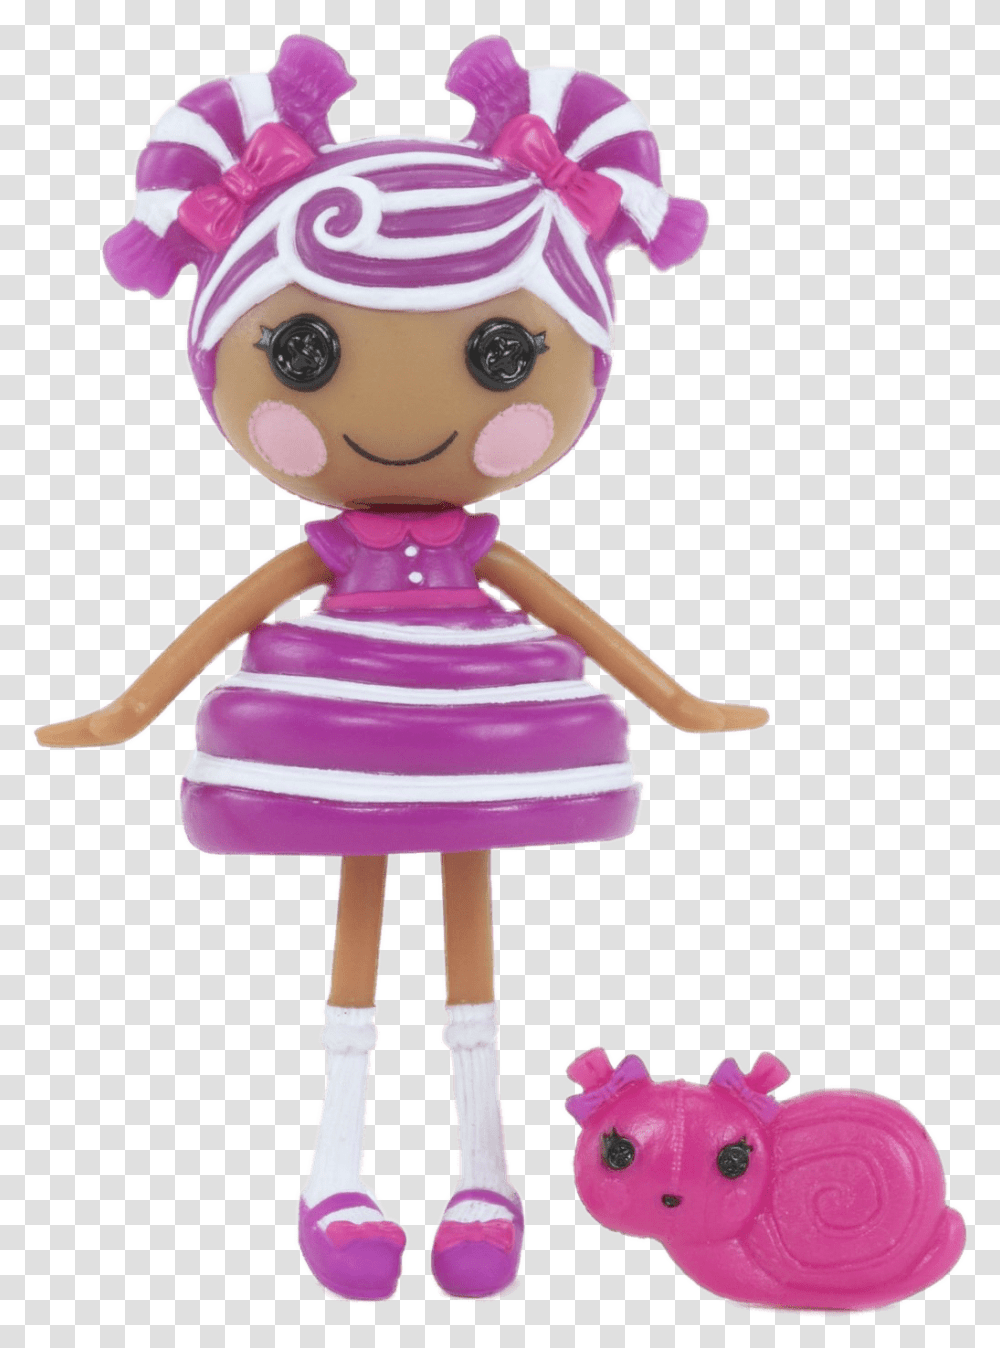 Lalaloopsy Grapevine Stripes, Doll, Toy, Barbie, Figurine Transparent Png